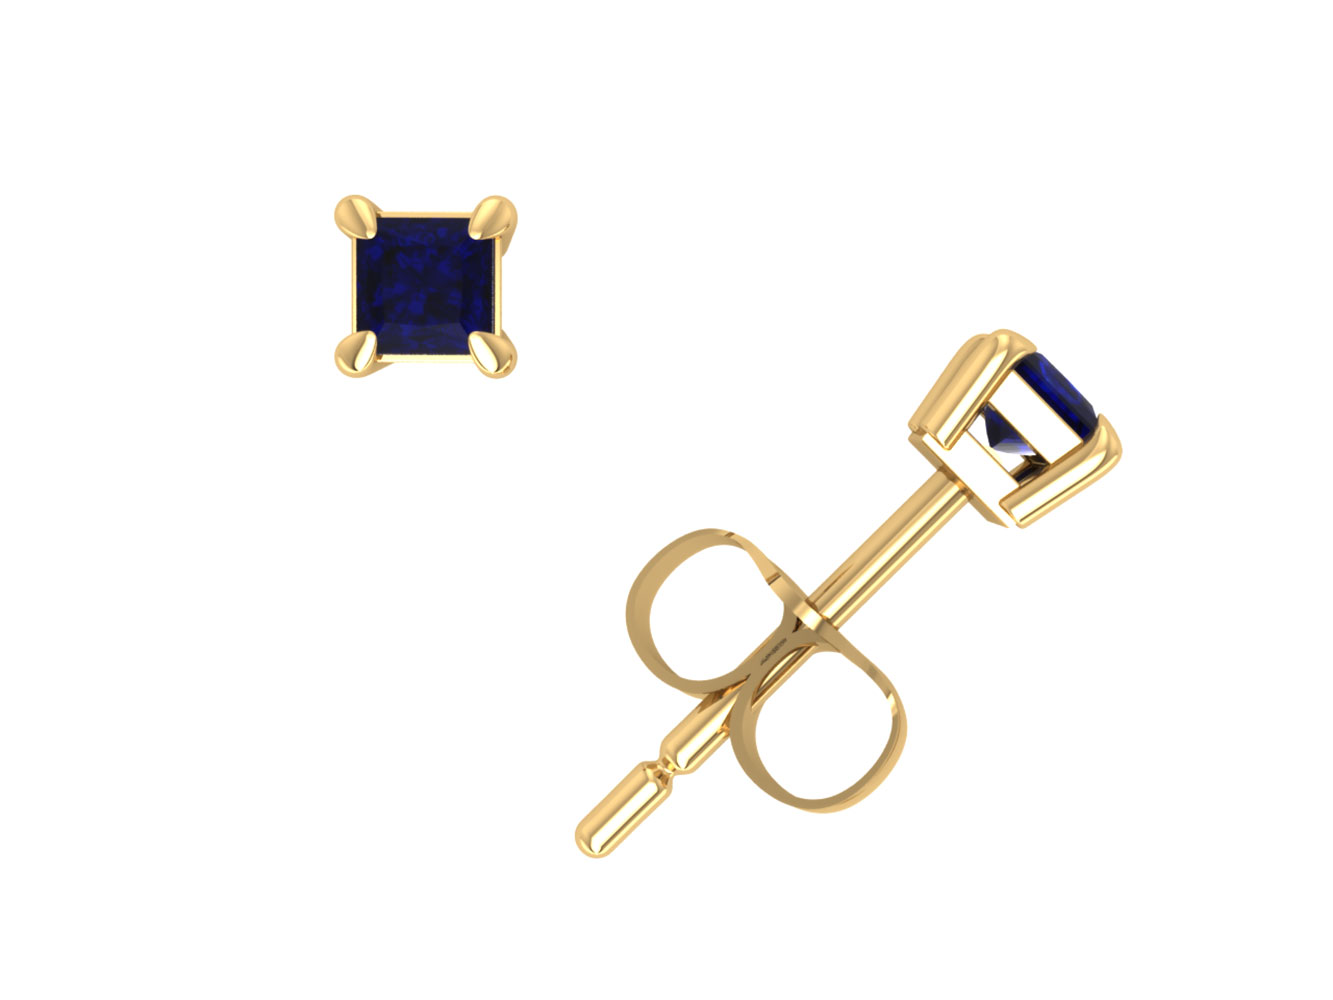 Jewel We Sell 0.33Ct Princess Cut Blue Sapphire Stud Earrings 14k White or Yellow Gold 4Prong Set Push Back AA Quality